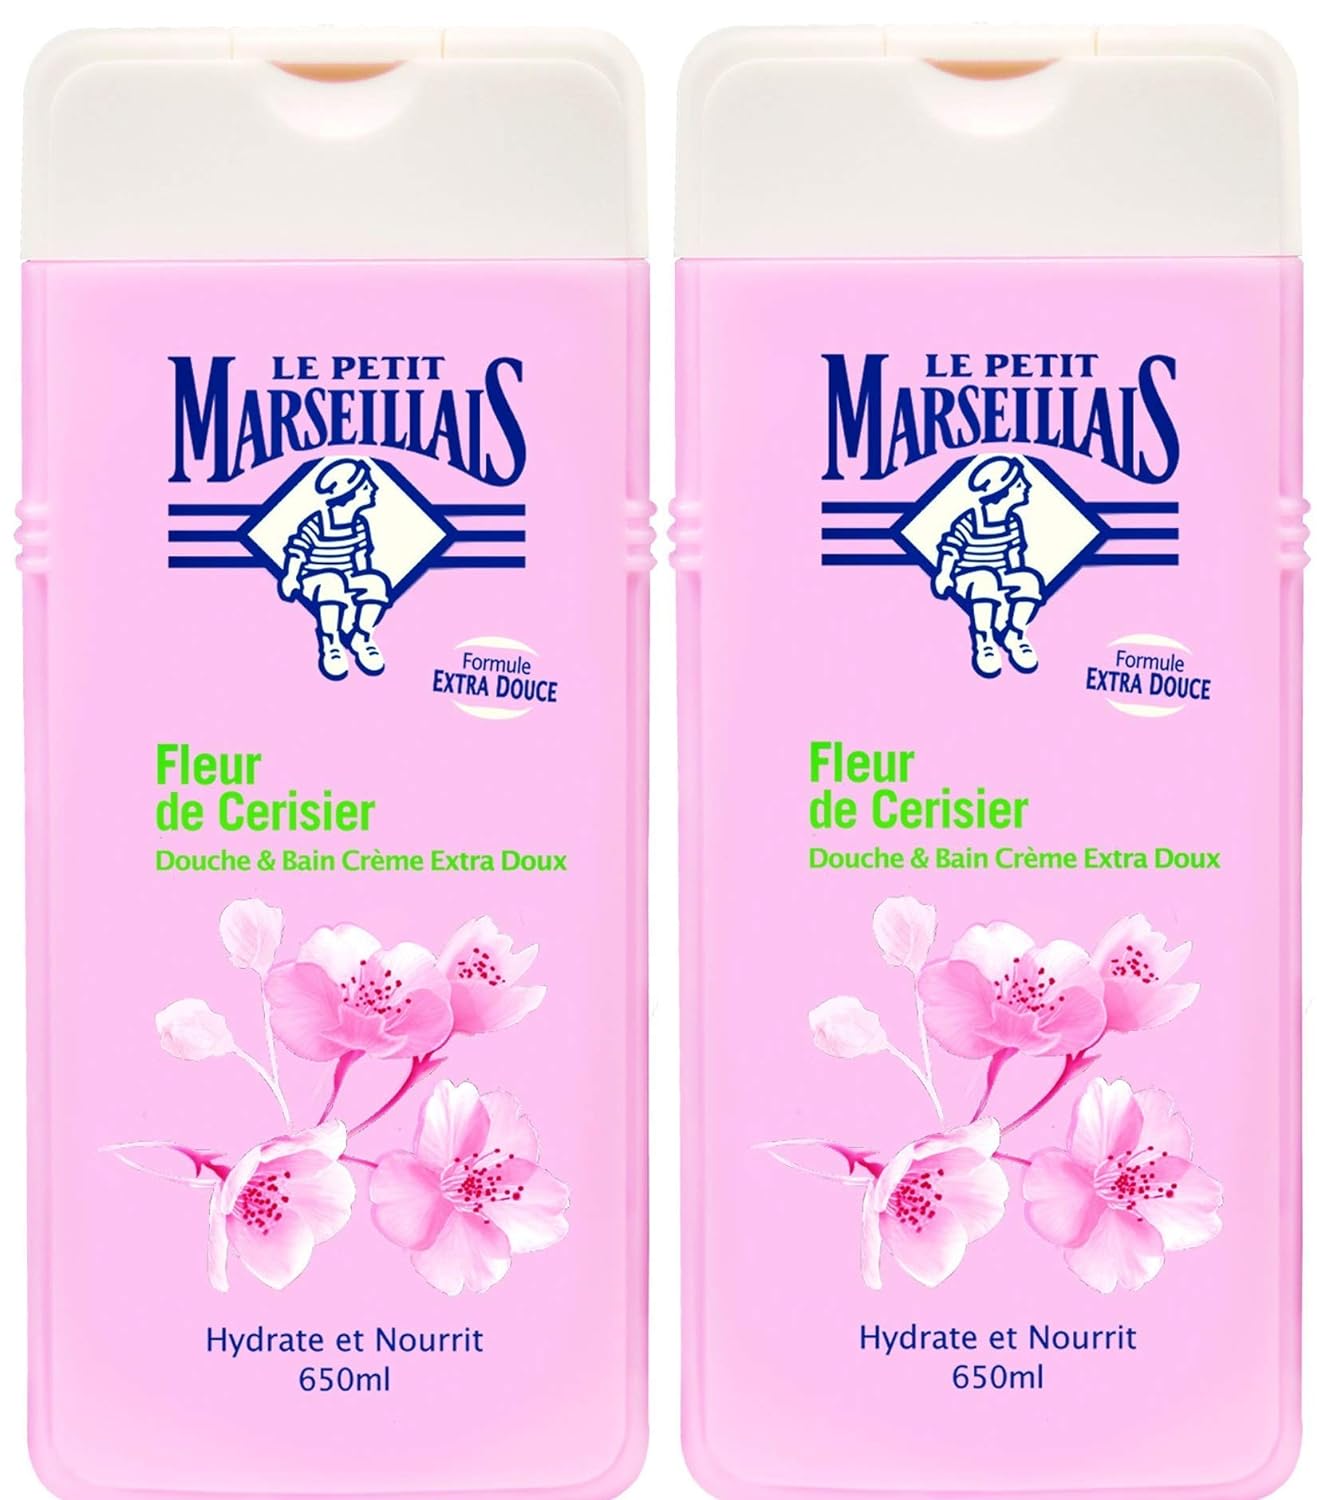 Le Petit Marseillais – Extra Soft – Cherry Blossom Bath and Shower Gel Bottle – 650ml – Pack of 2